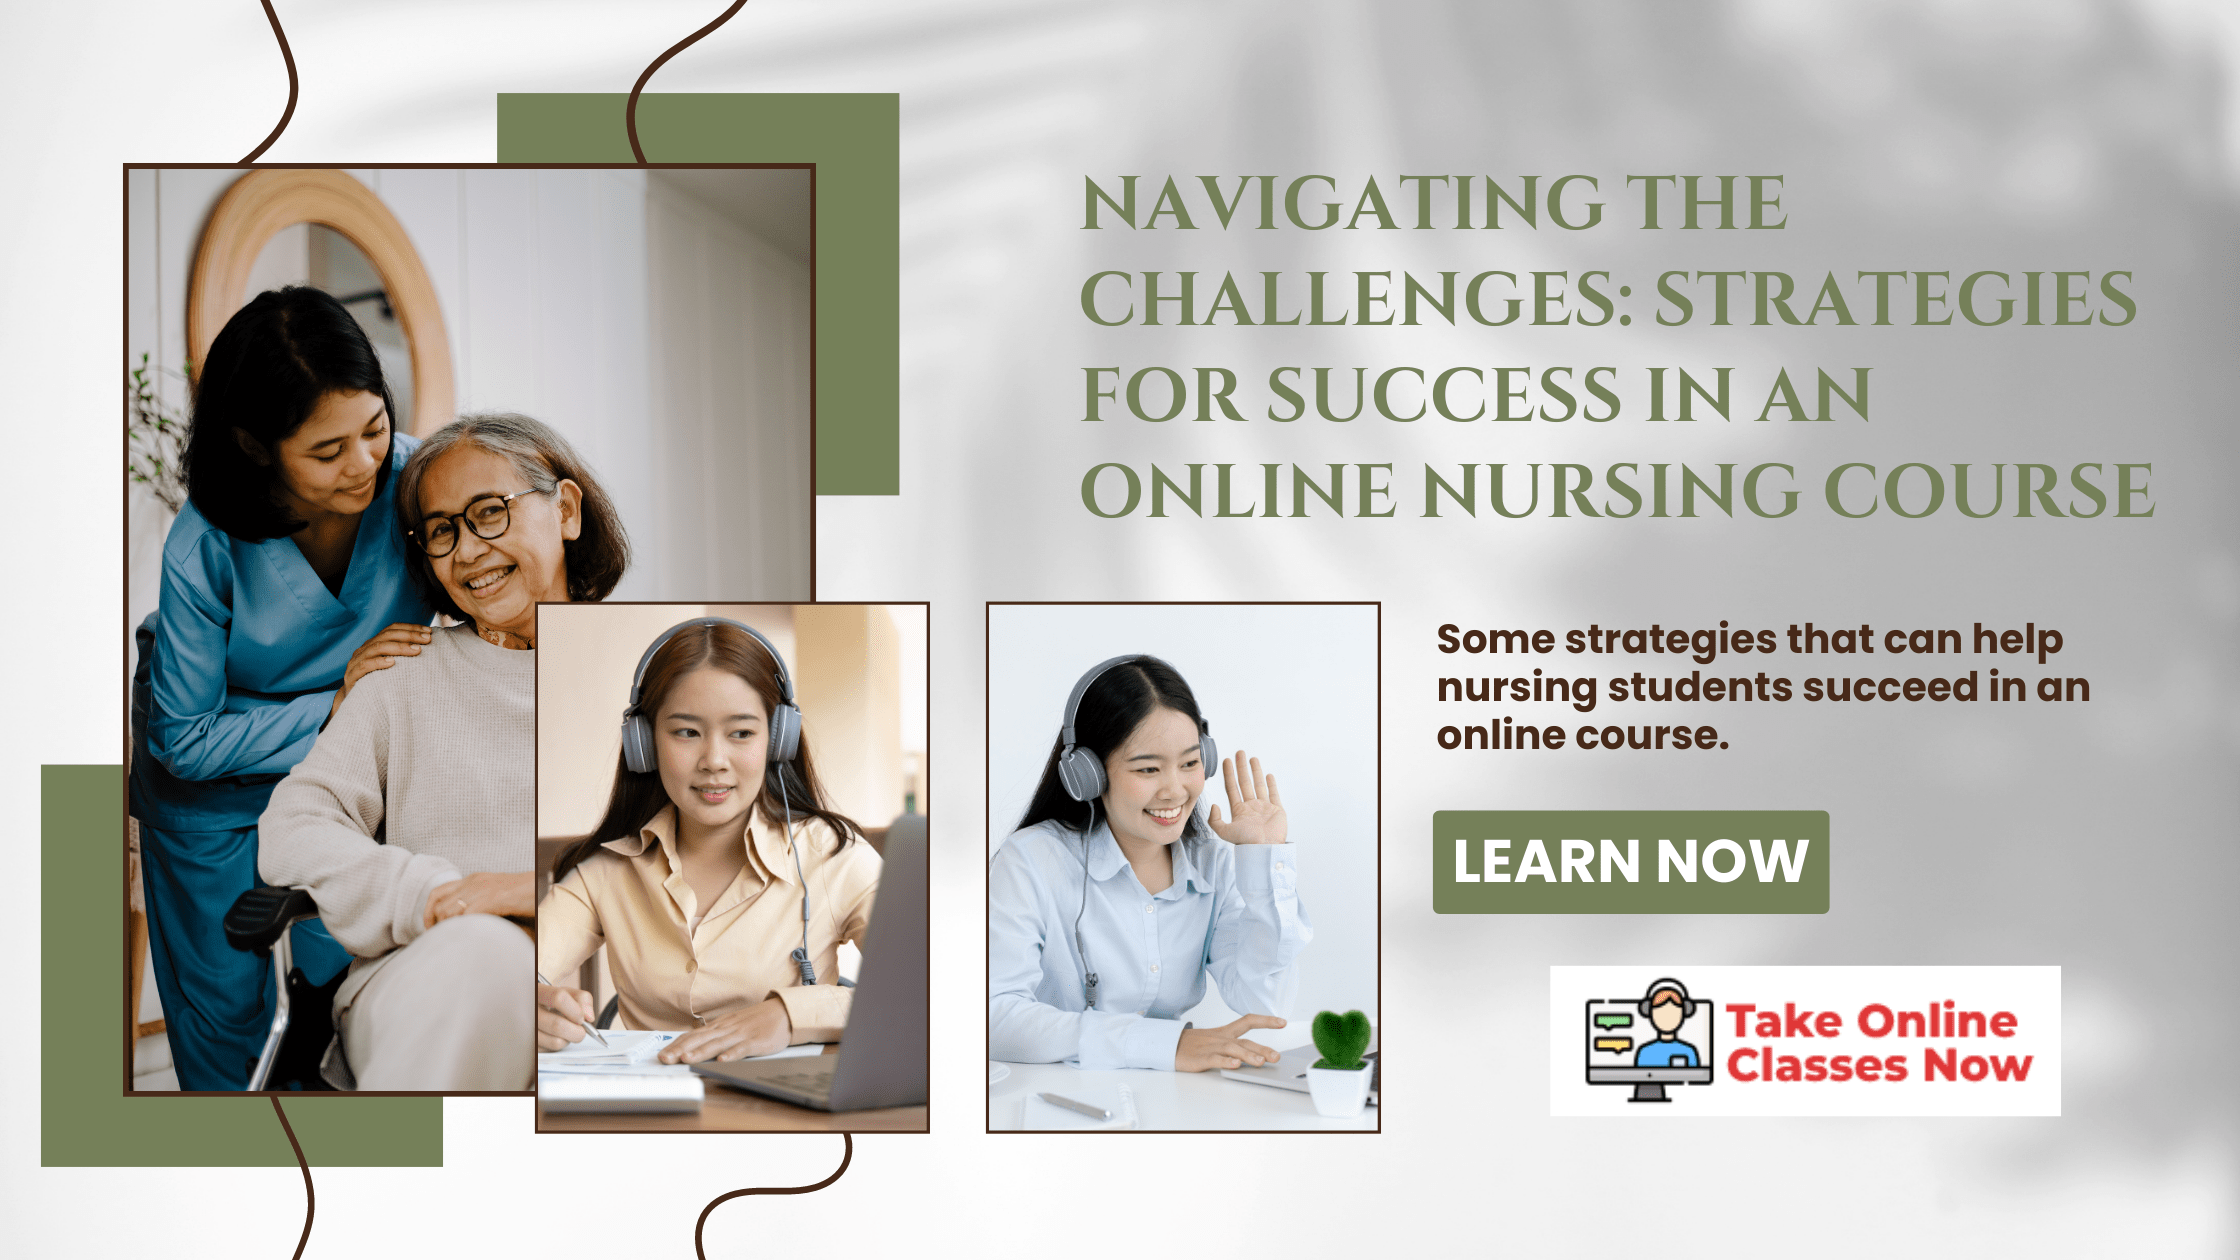 Navigating the Challenges: Strategies for Success in an Online Nursing Course